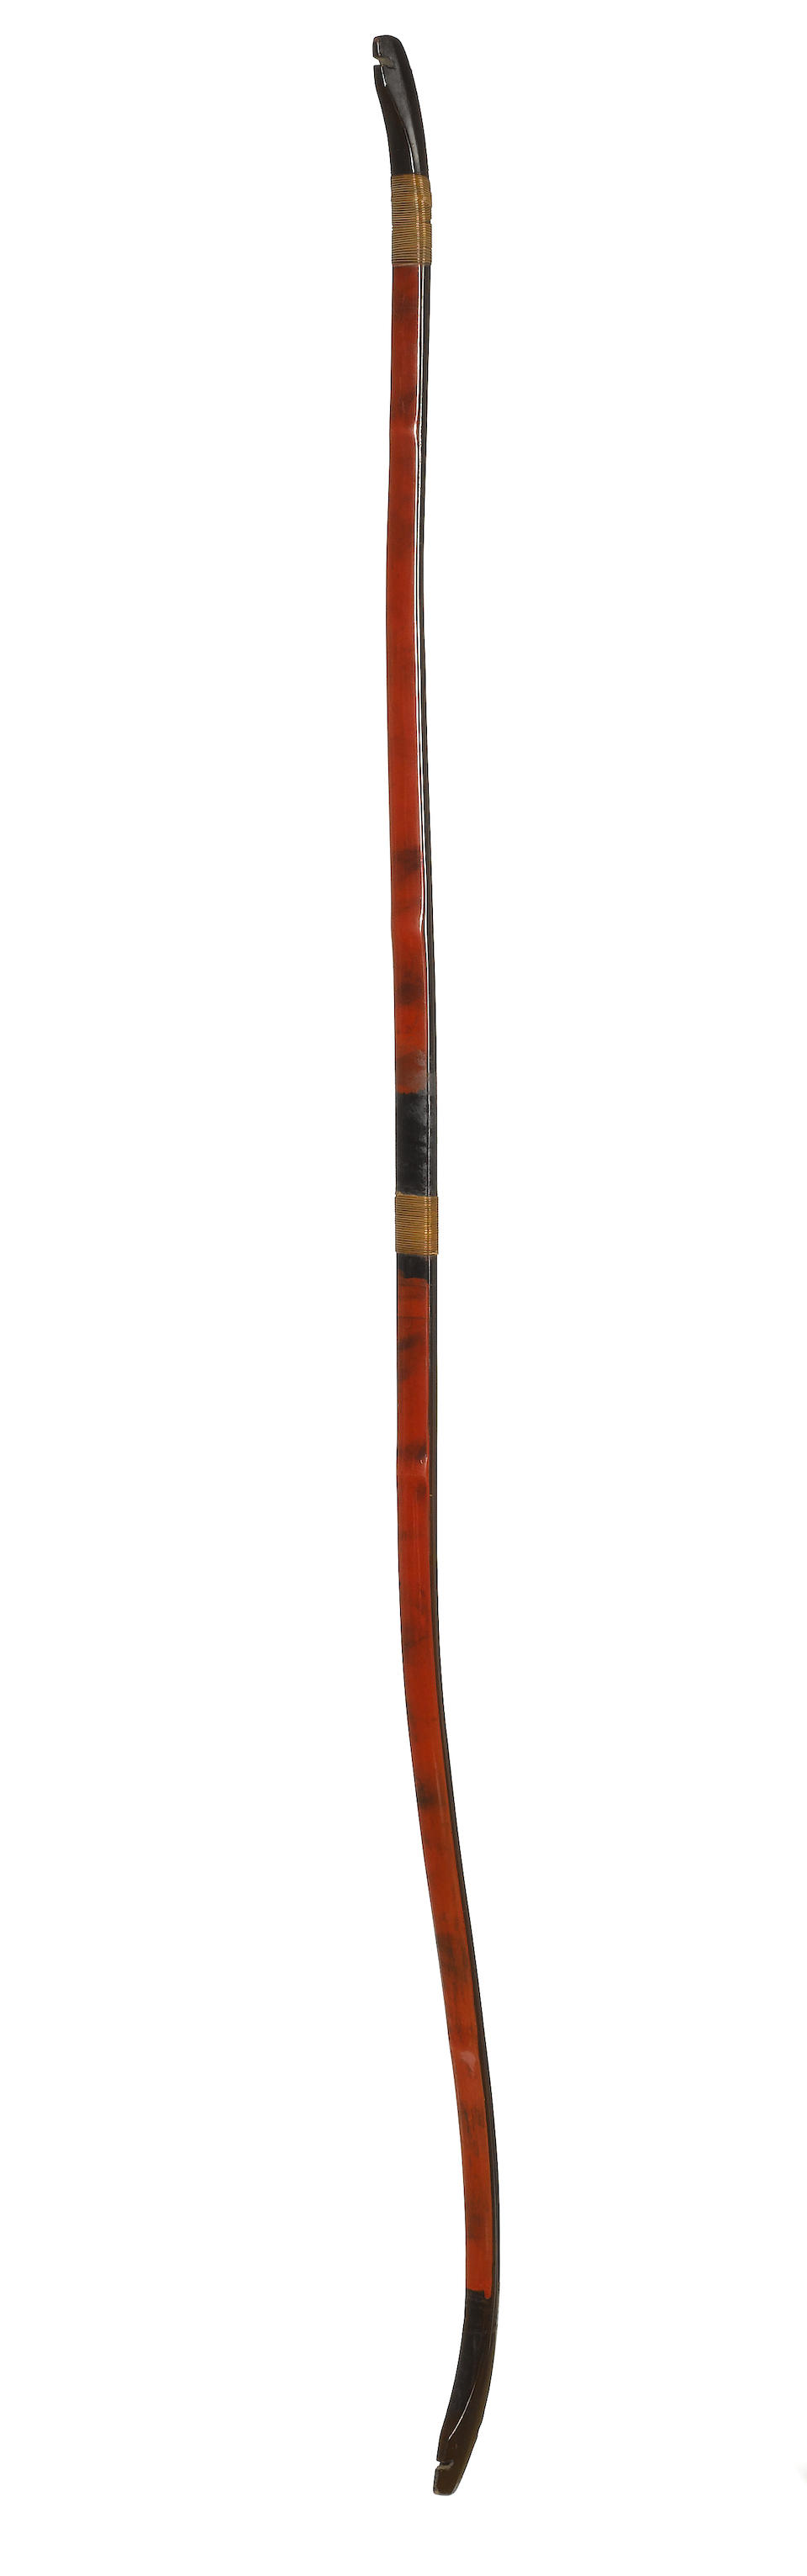 An extremely rare Negoro lacquer yumi (longbow) Muromachi Period